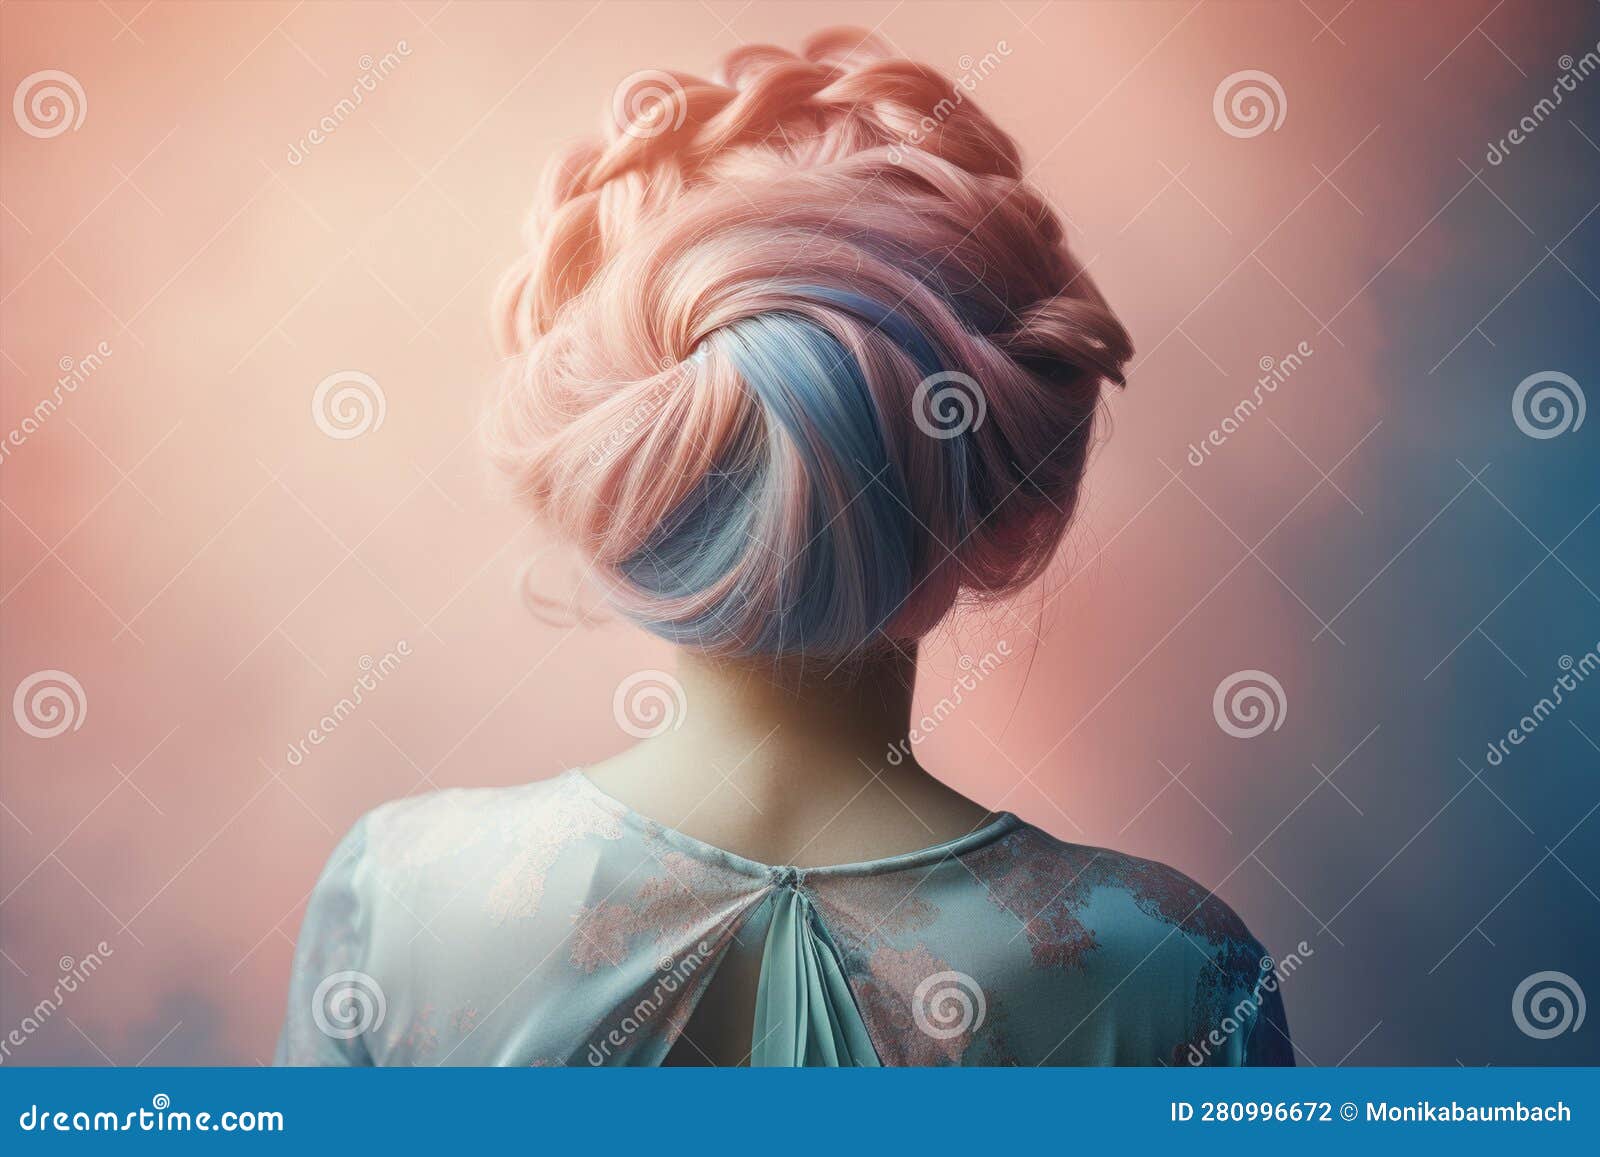 Pastel Blue and Pink Hair Dye - wide 9